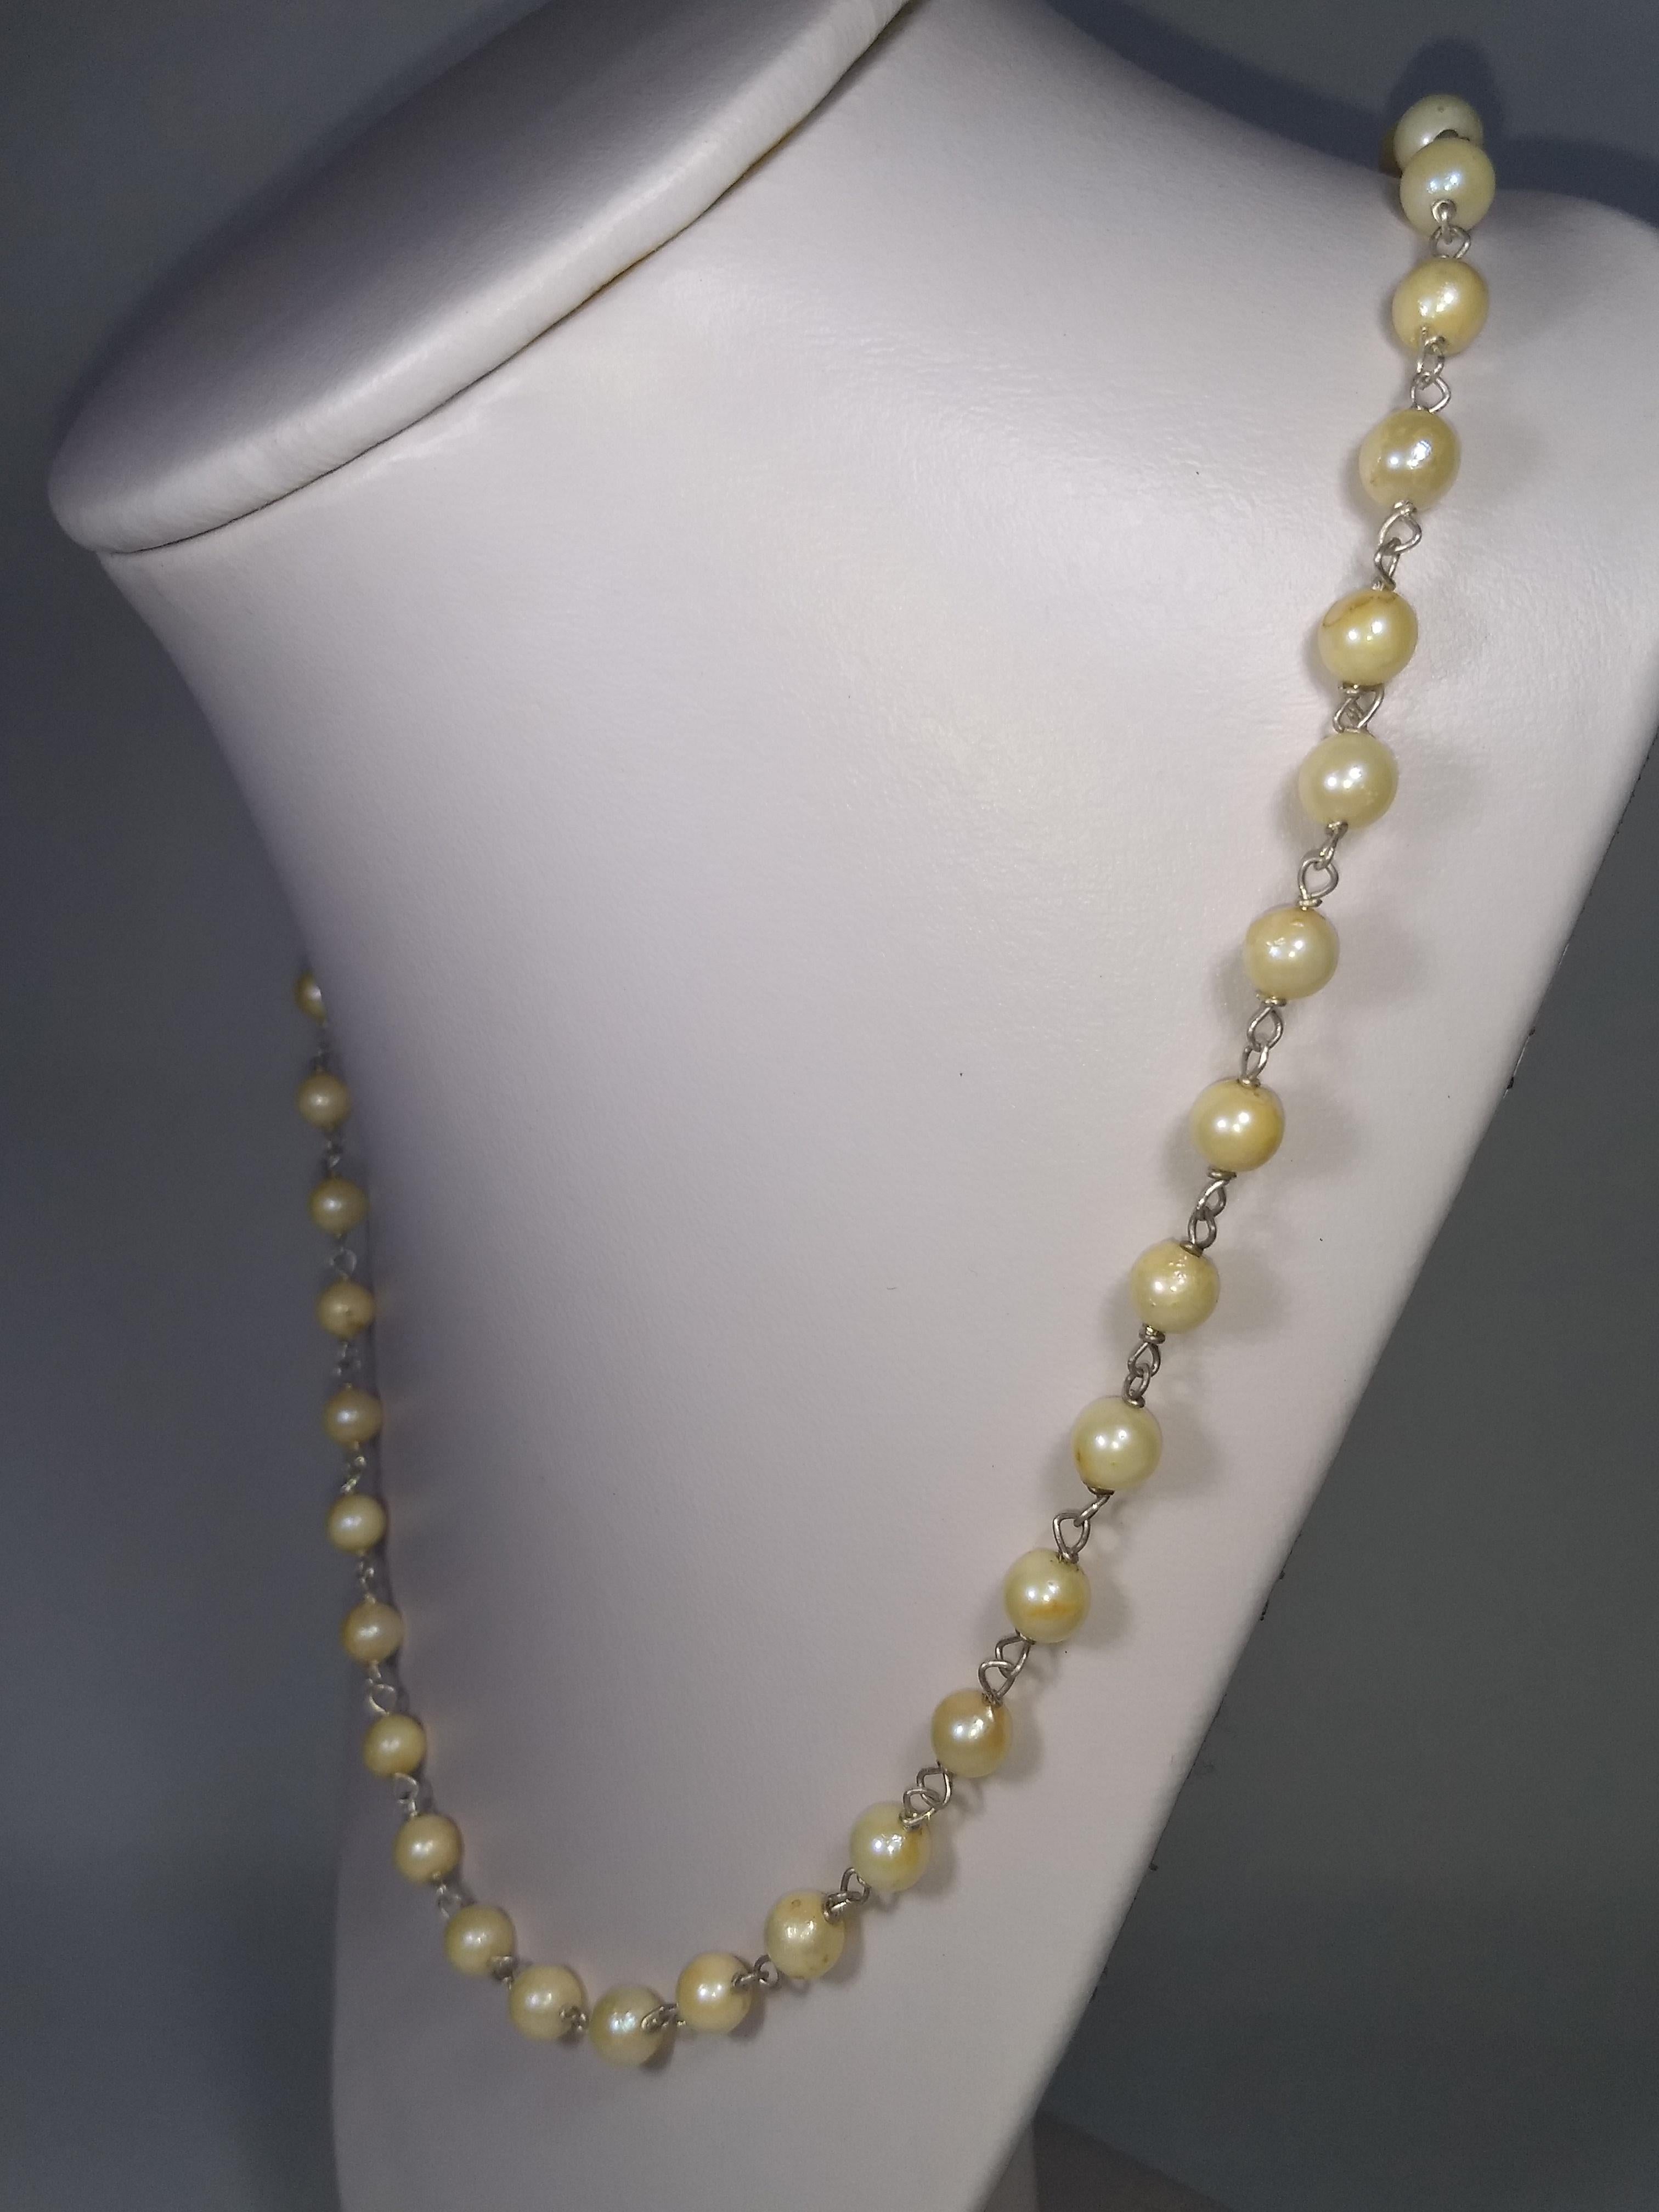 This Alberto Juan one of a kind necklace was handmade from natural baroque pearls and sterling silver.  The chain and findings used in this piece are sterling silver. Necklace measures 27